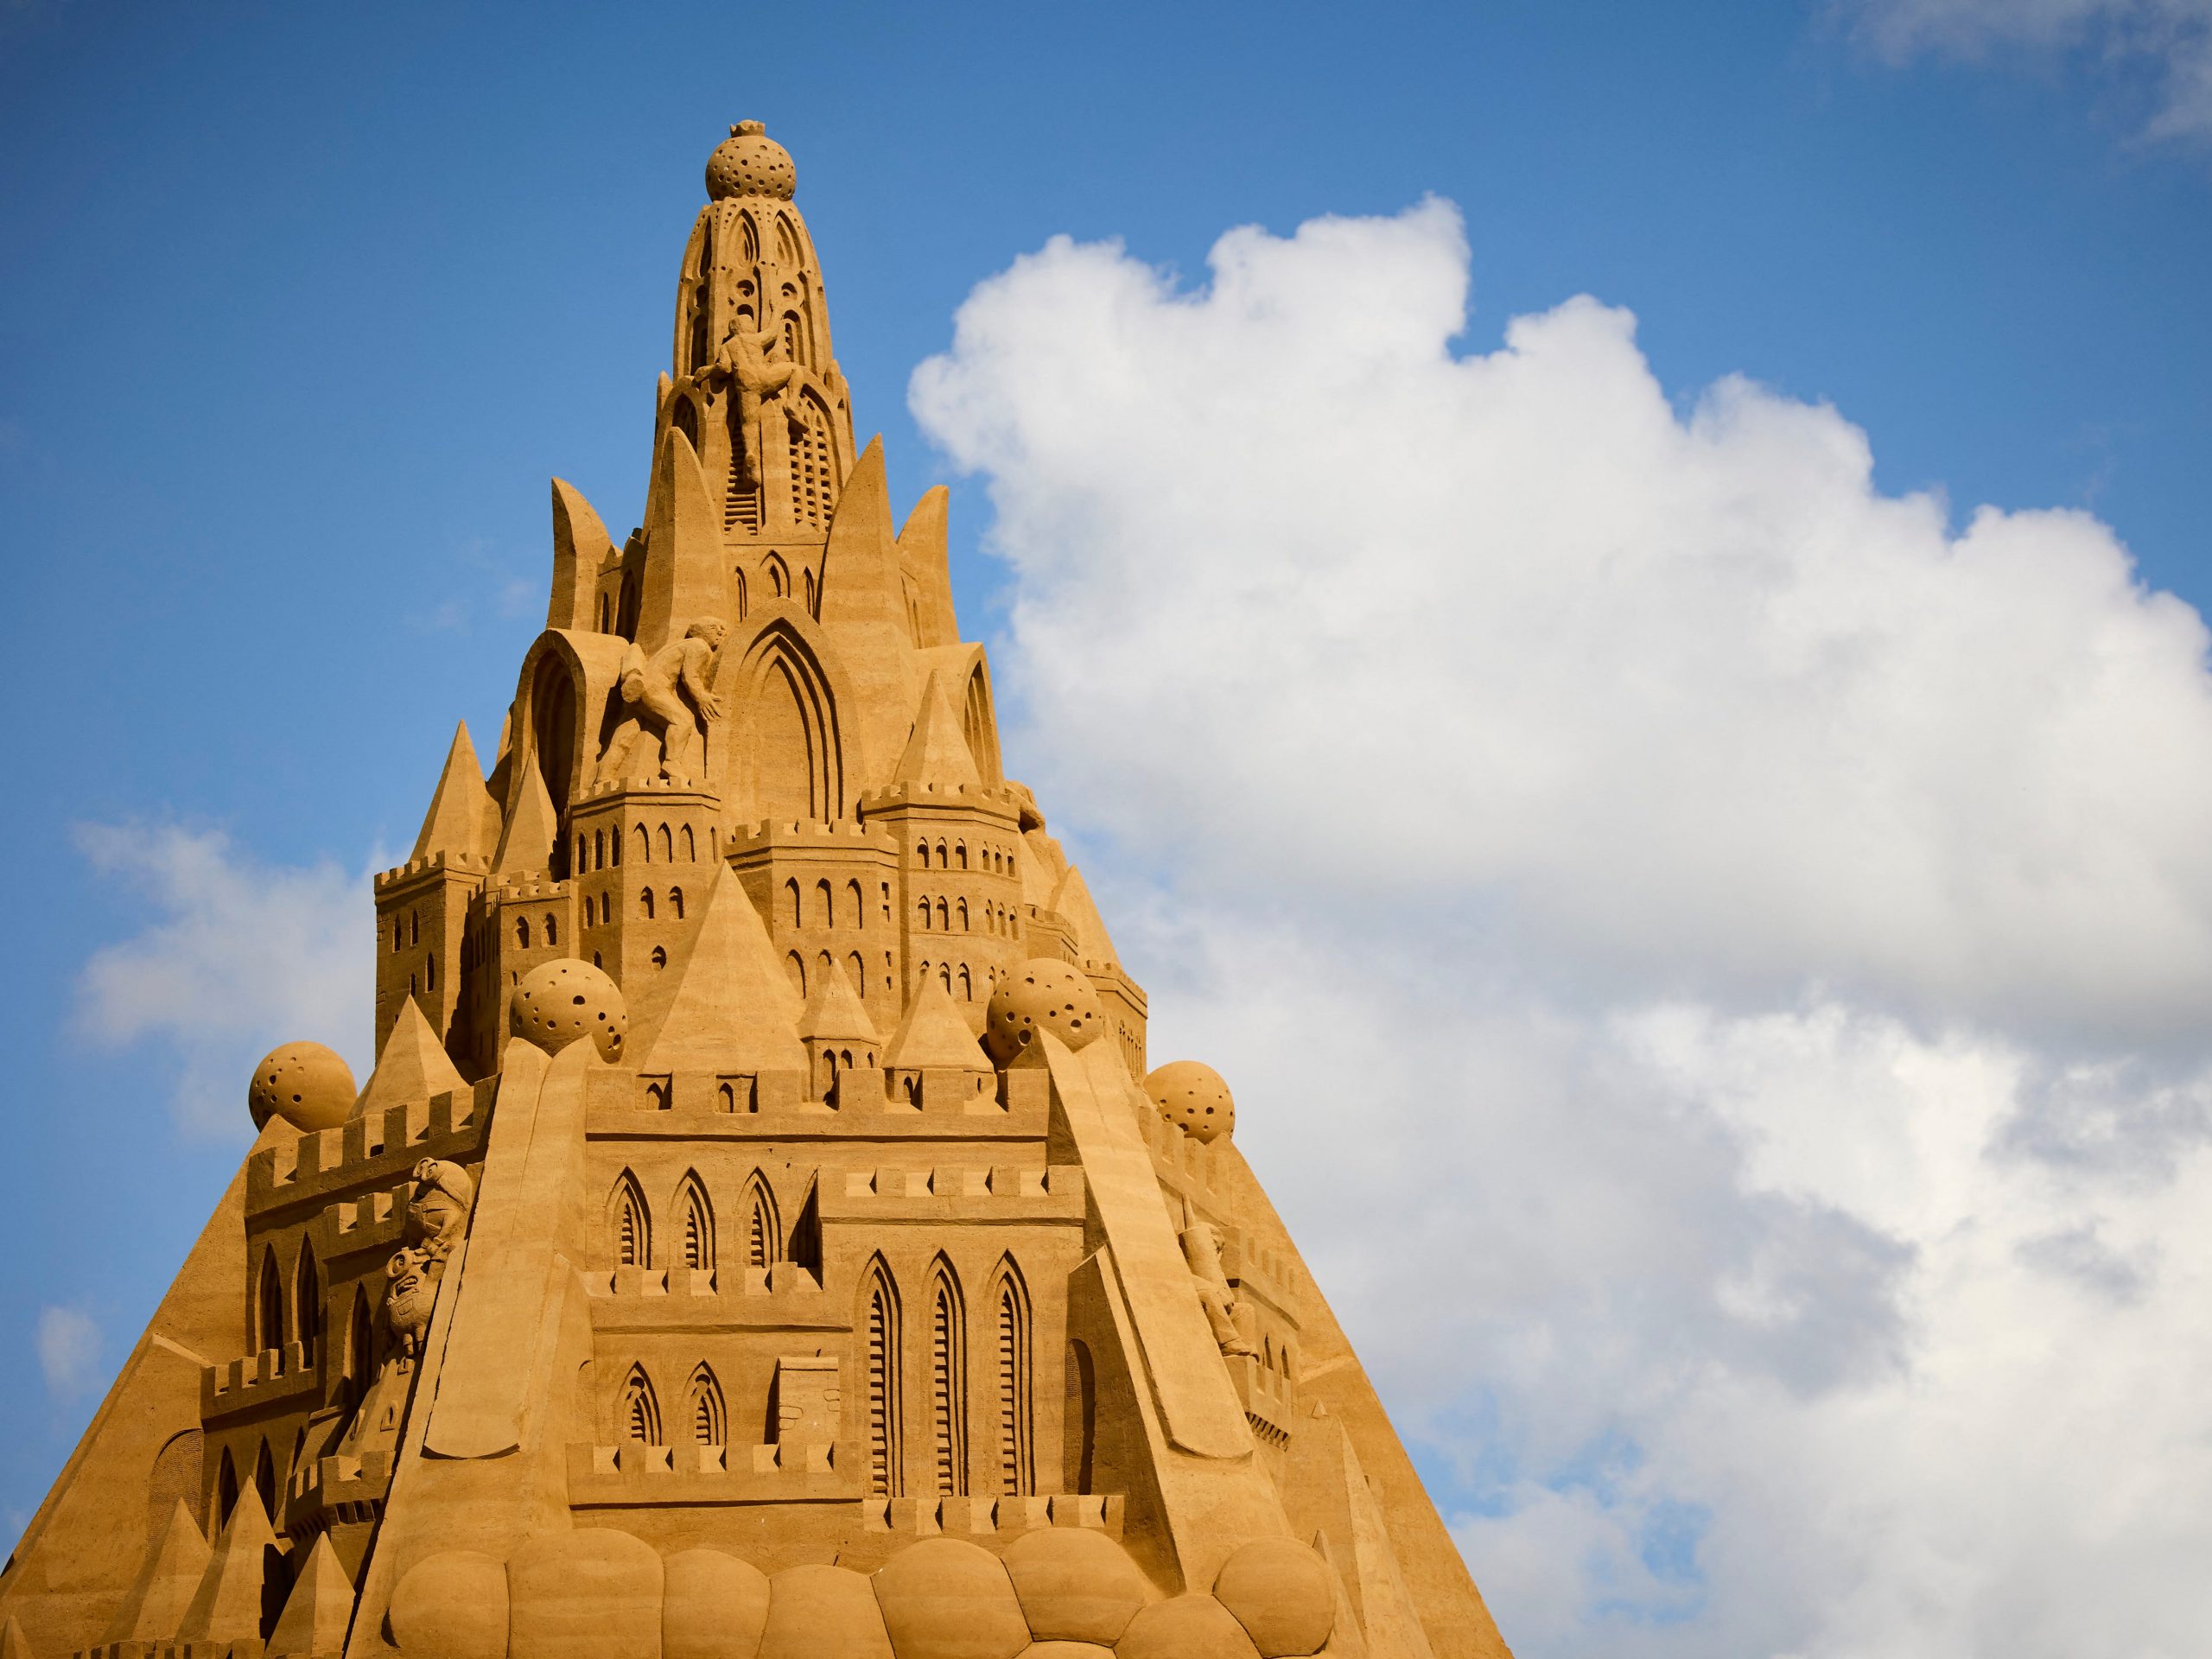 The top section of a massive sandcastle with intricate designs in the sand sculpture.